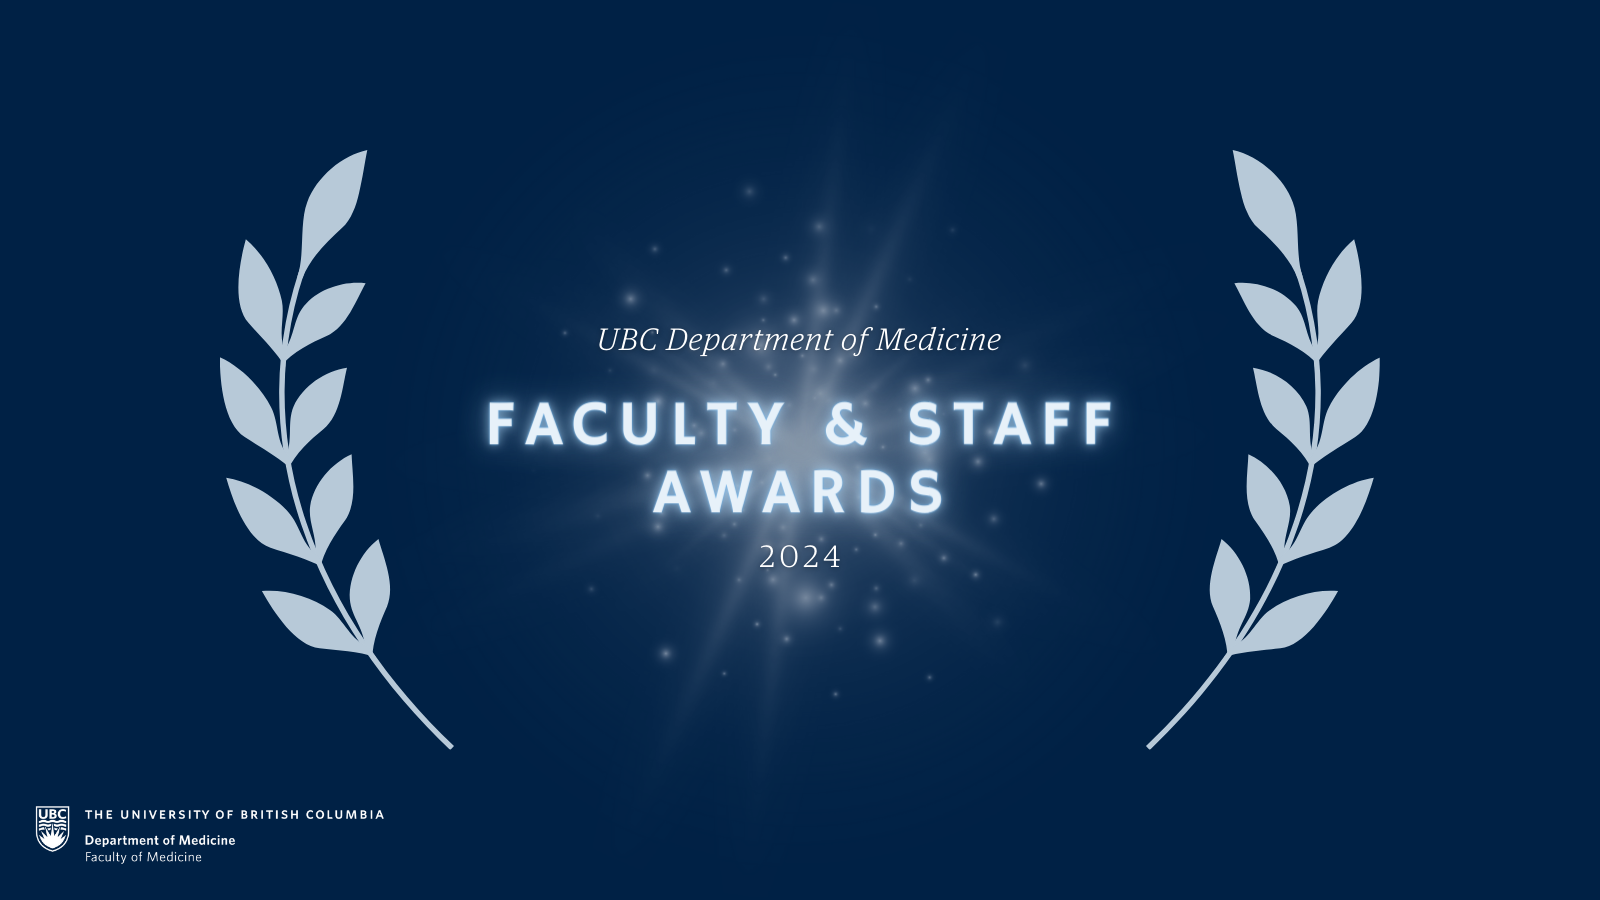 Join us on June 13, 2024 for the UBC Department of Medicine Annual Faculty & Staff Awards Presentation